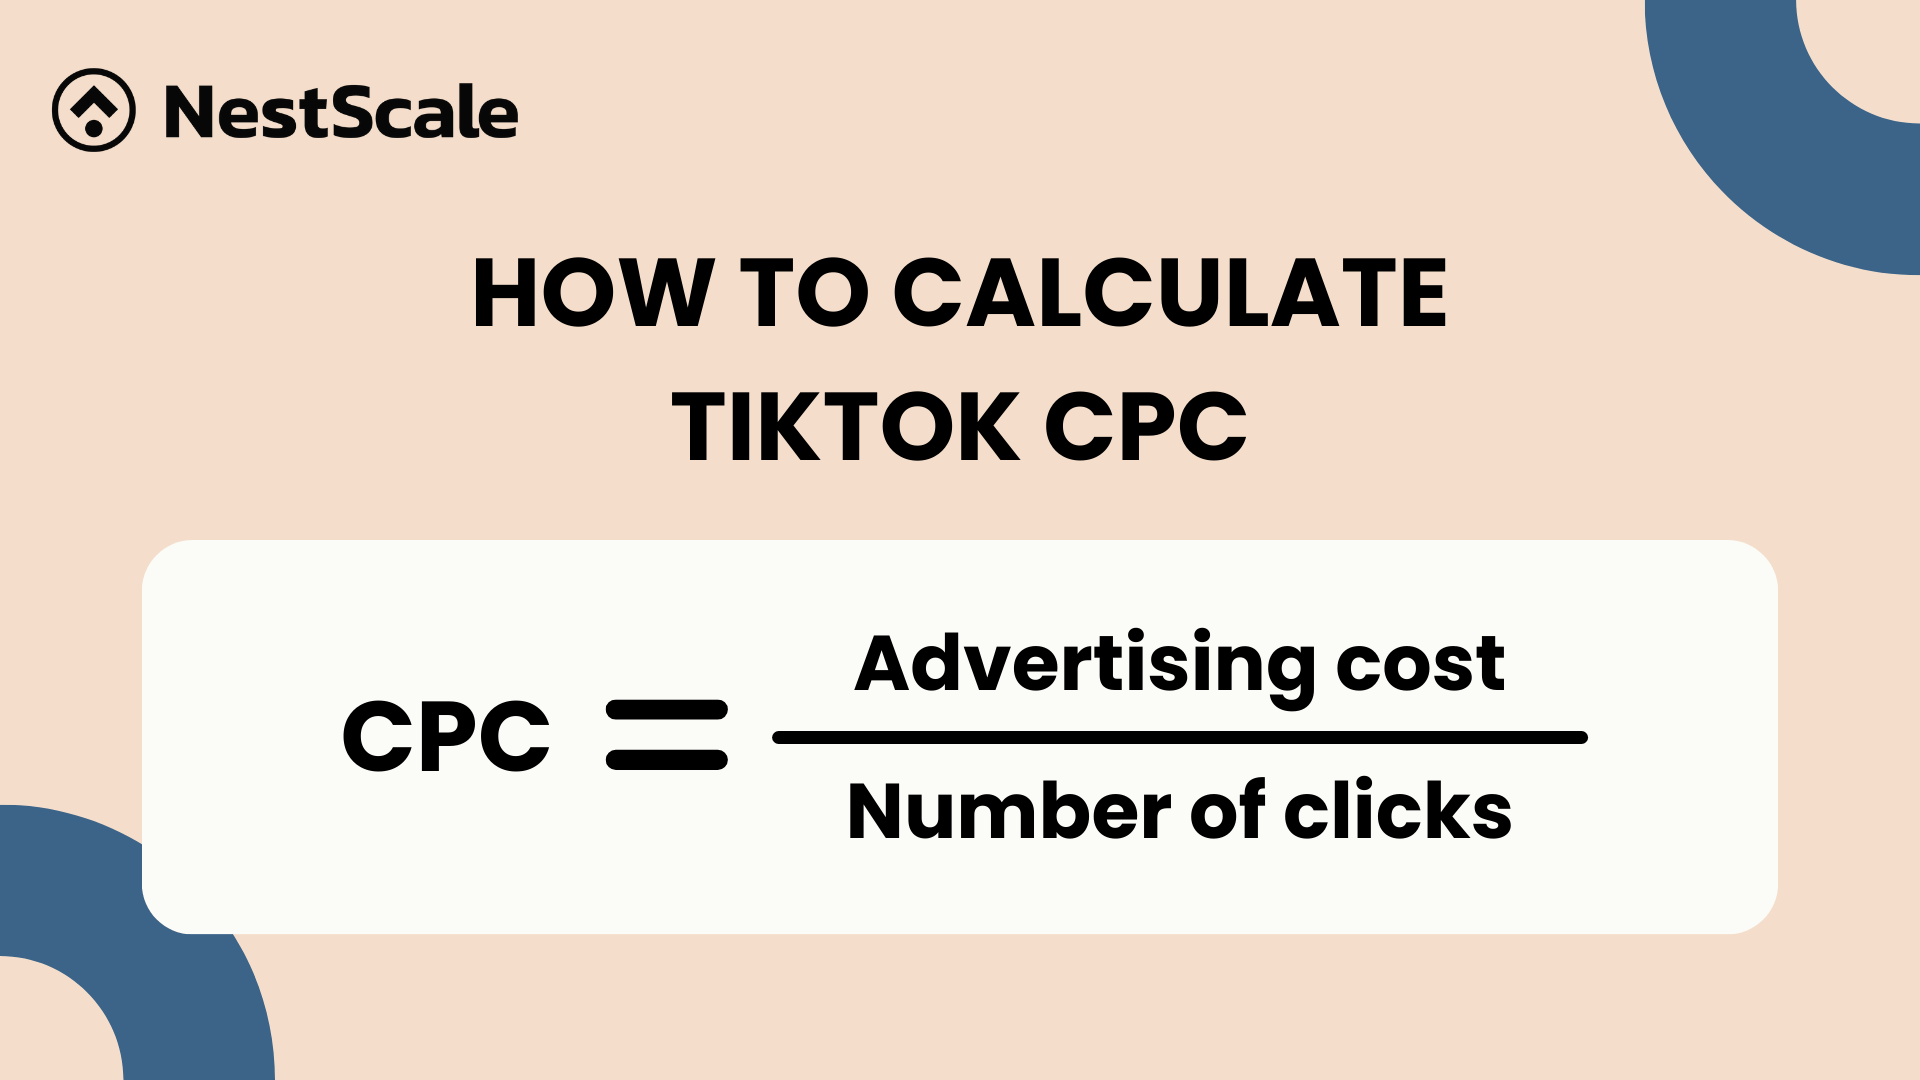 TikTok CPM and Advertising: Our Latest Tests and Results